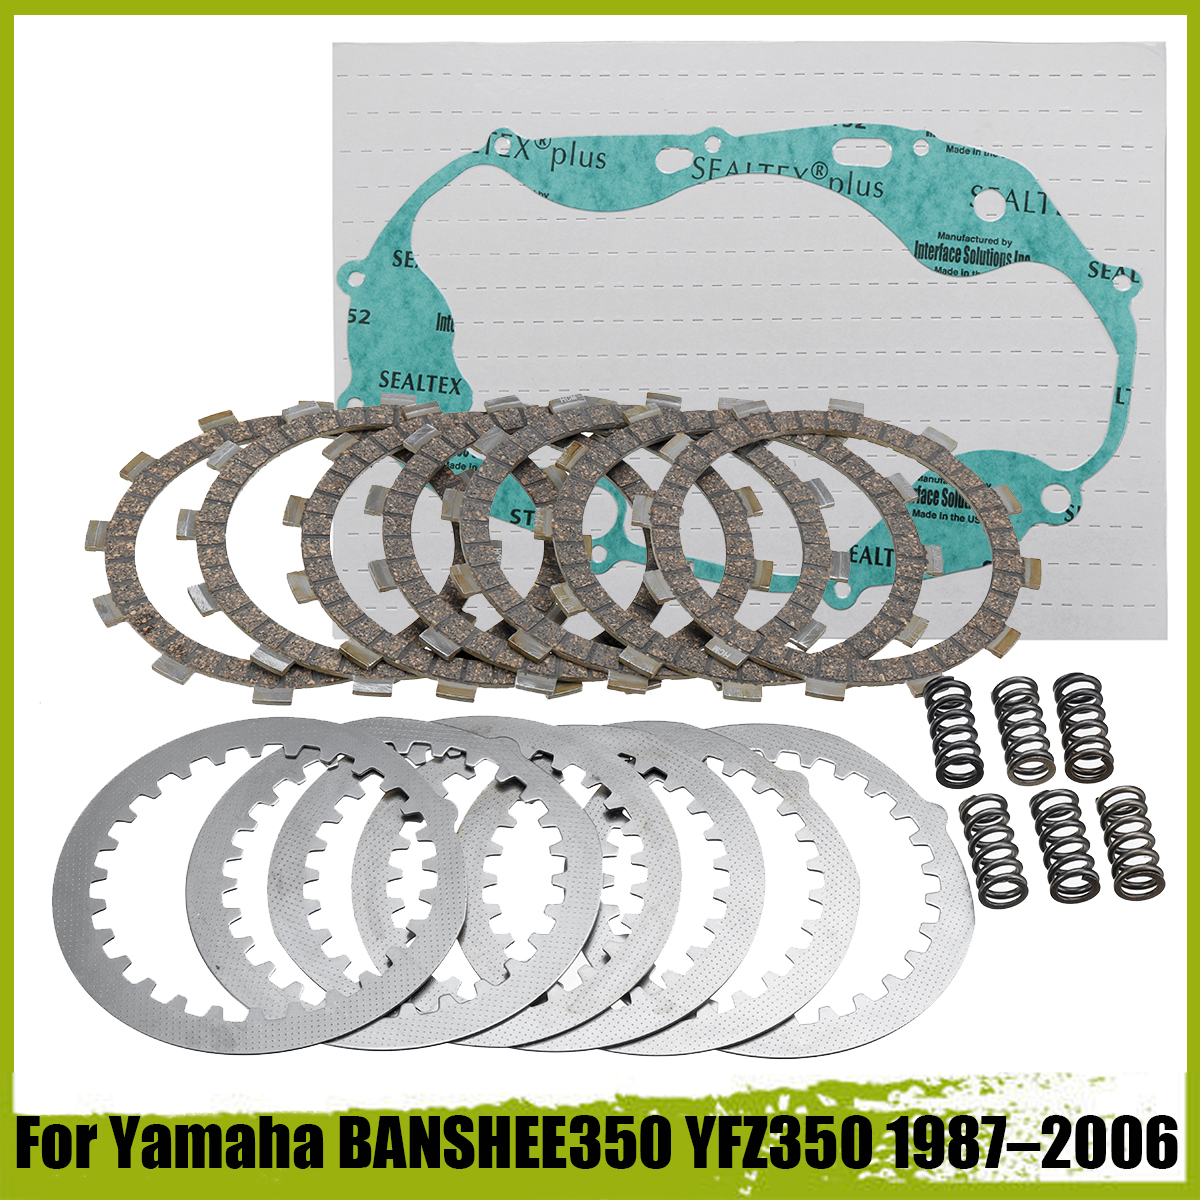 Yamaha 350 Banshee Clutch Kit with Heavy Duty Springs and Gasket 1987-2006 NEW